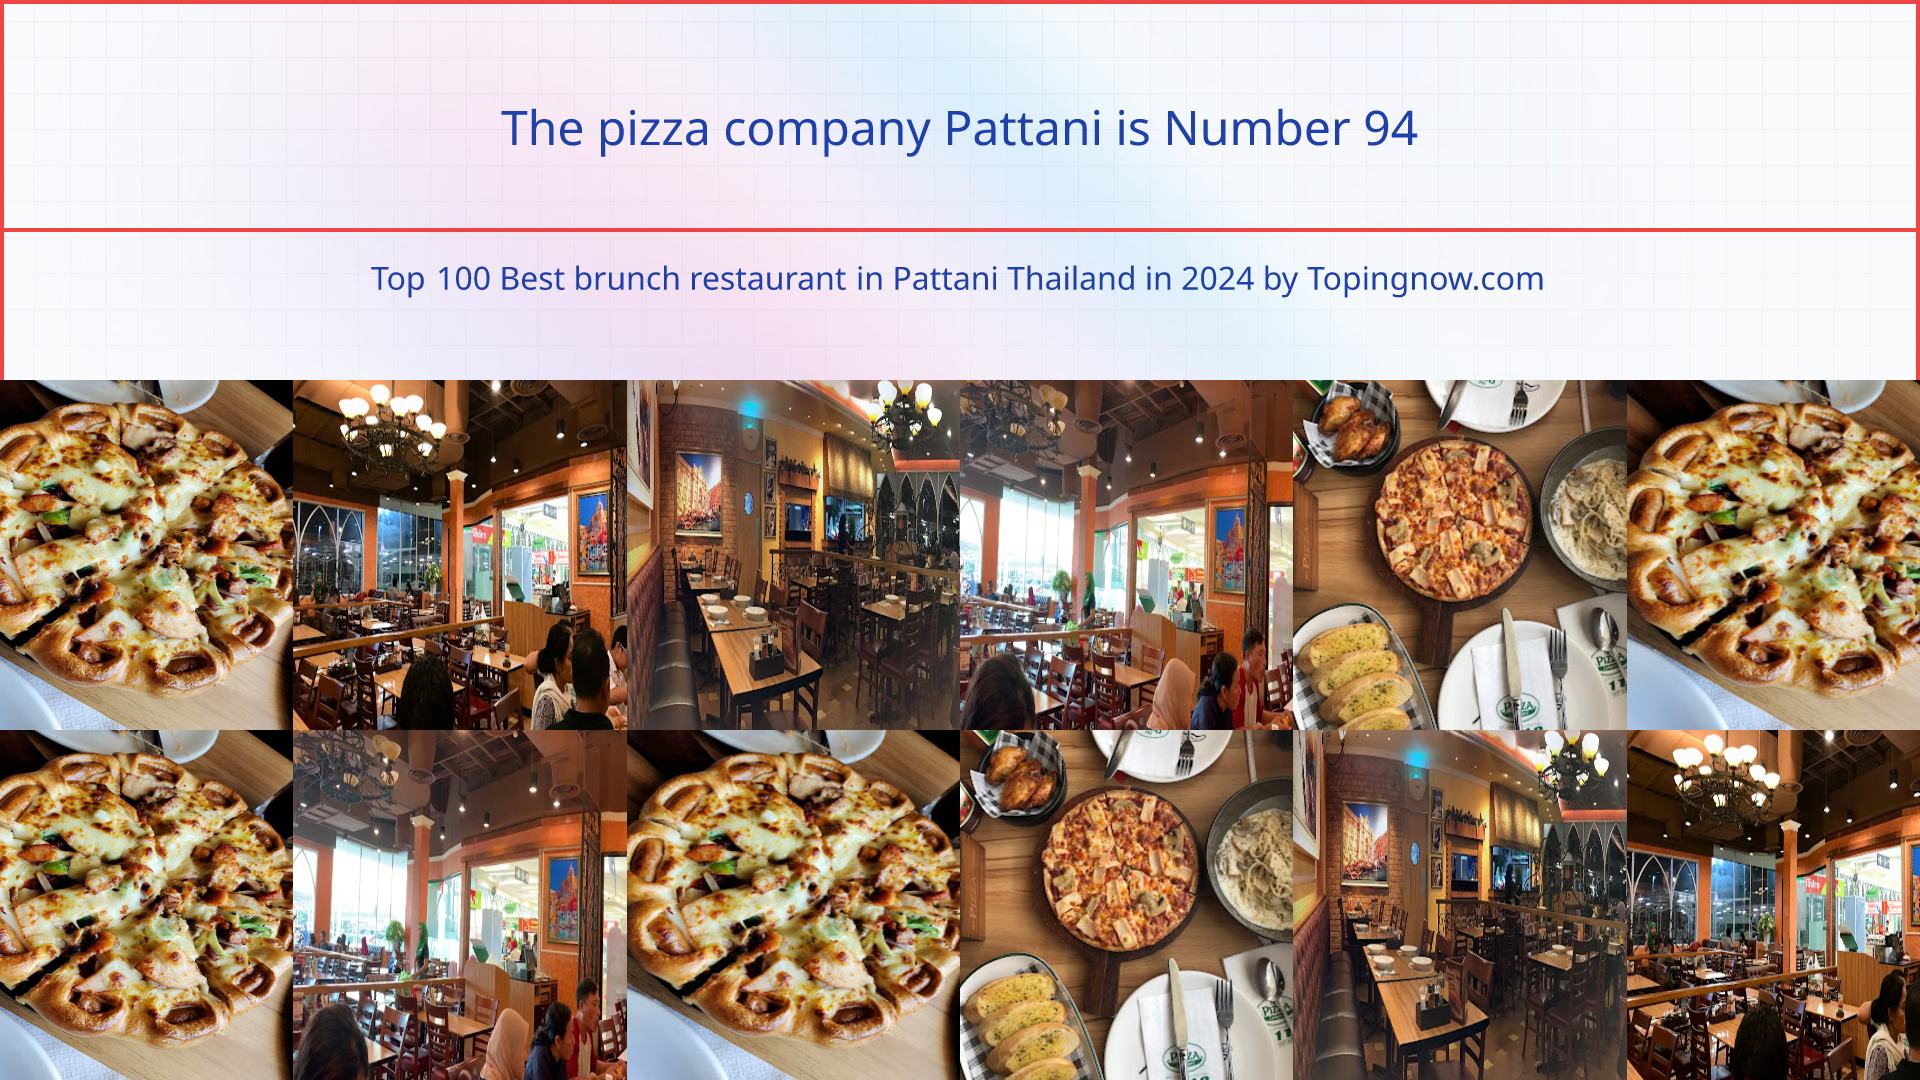 The pizza company Pattani: Top 100 Best brunch restaurant in Pattani Thailand in 2024